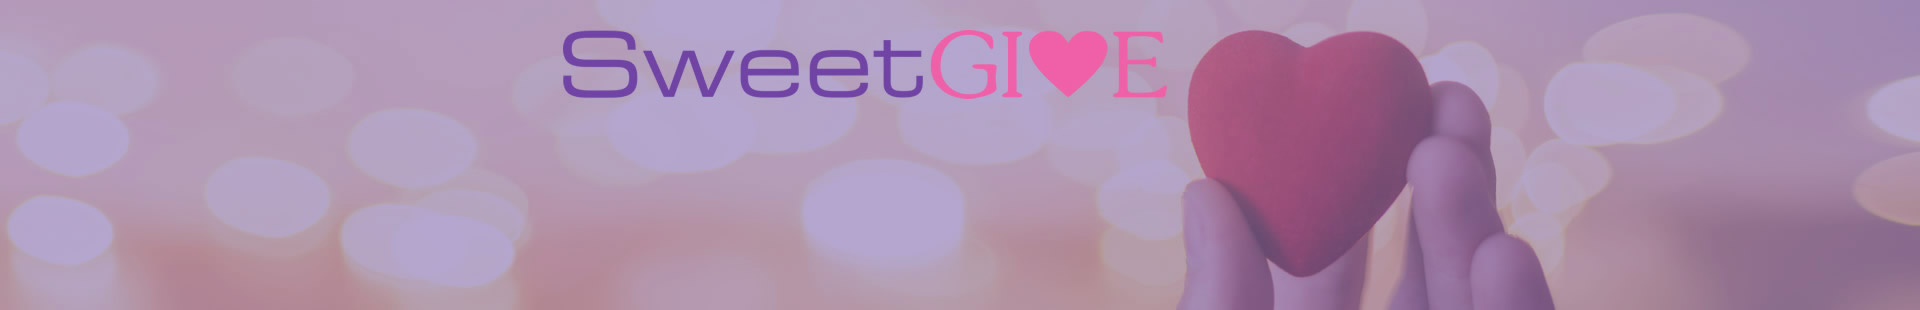 SweetGive: Sweet giving from kind-hearted young people